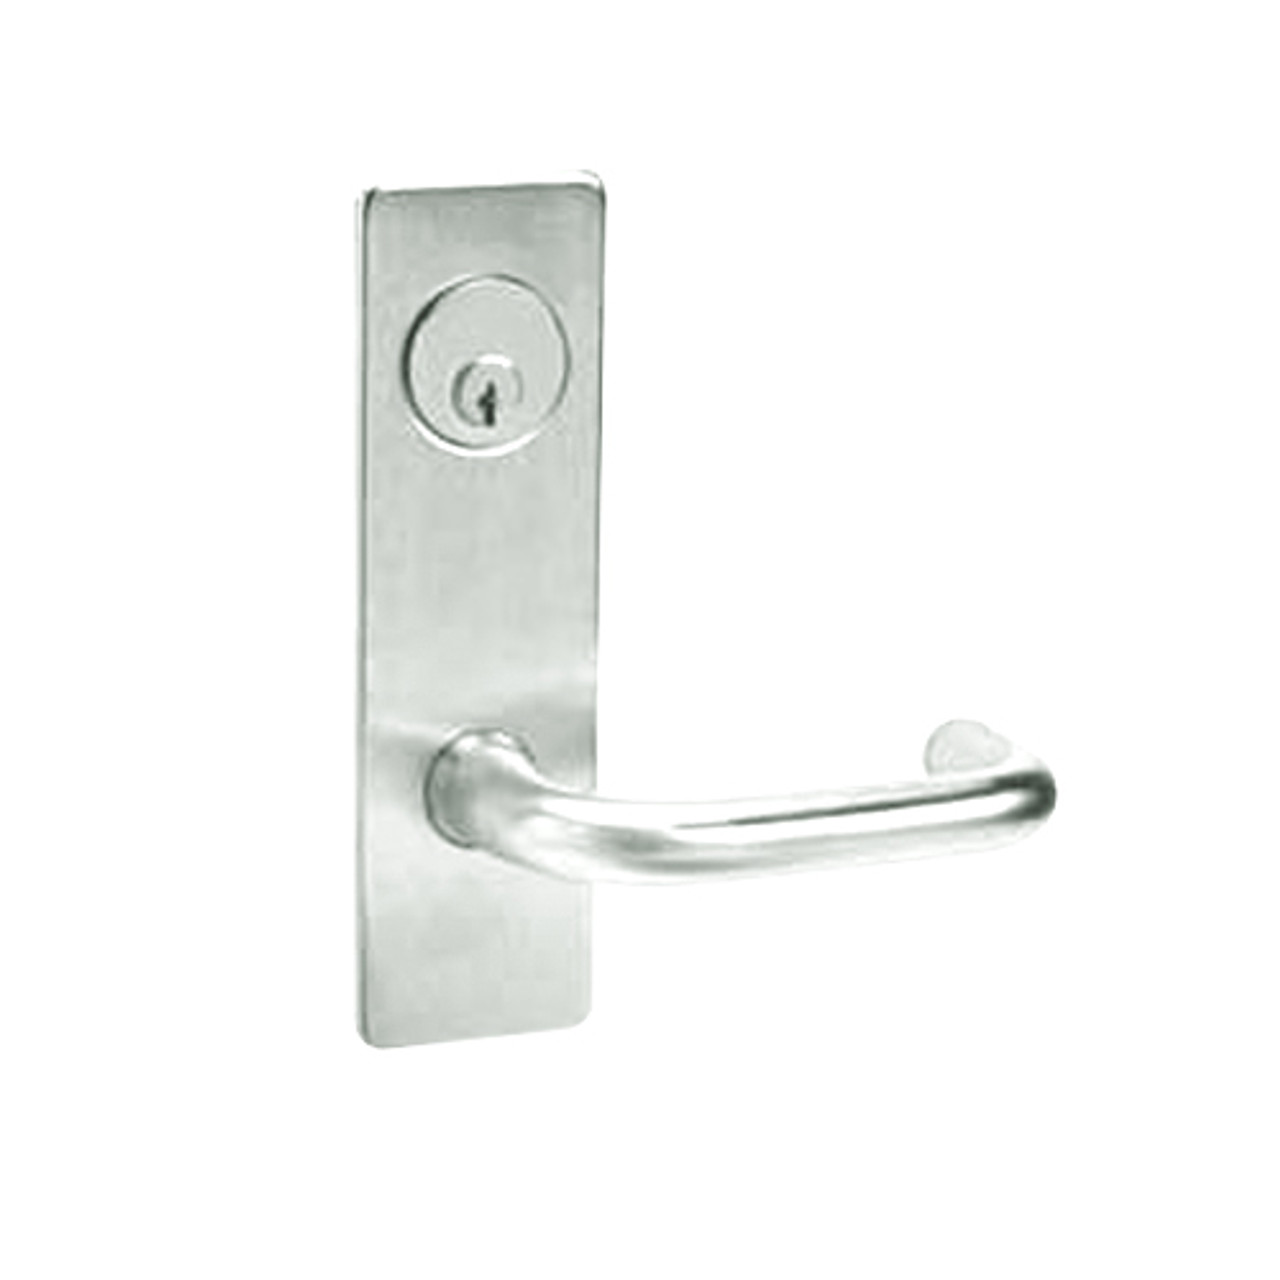 ML2069-LWR-618 Corbin Russwin ML2000 Series Mortise Institution Privacy Locksets with Lustra Lever in Bright Nickel